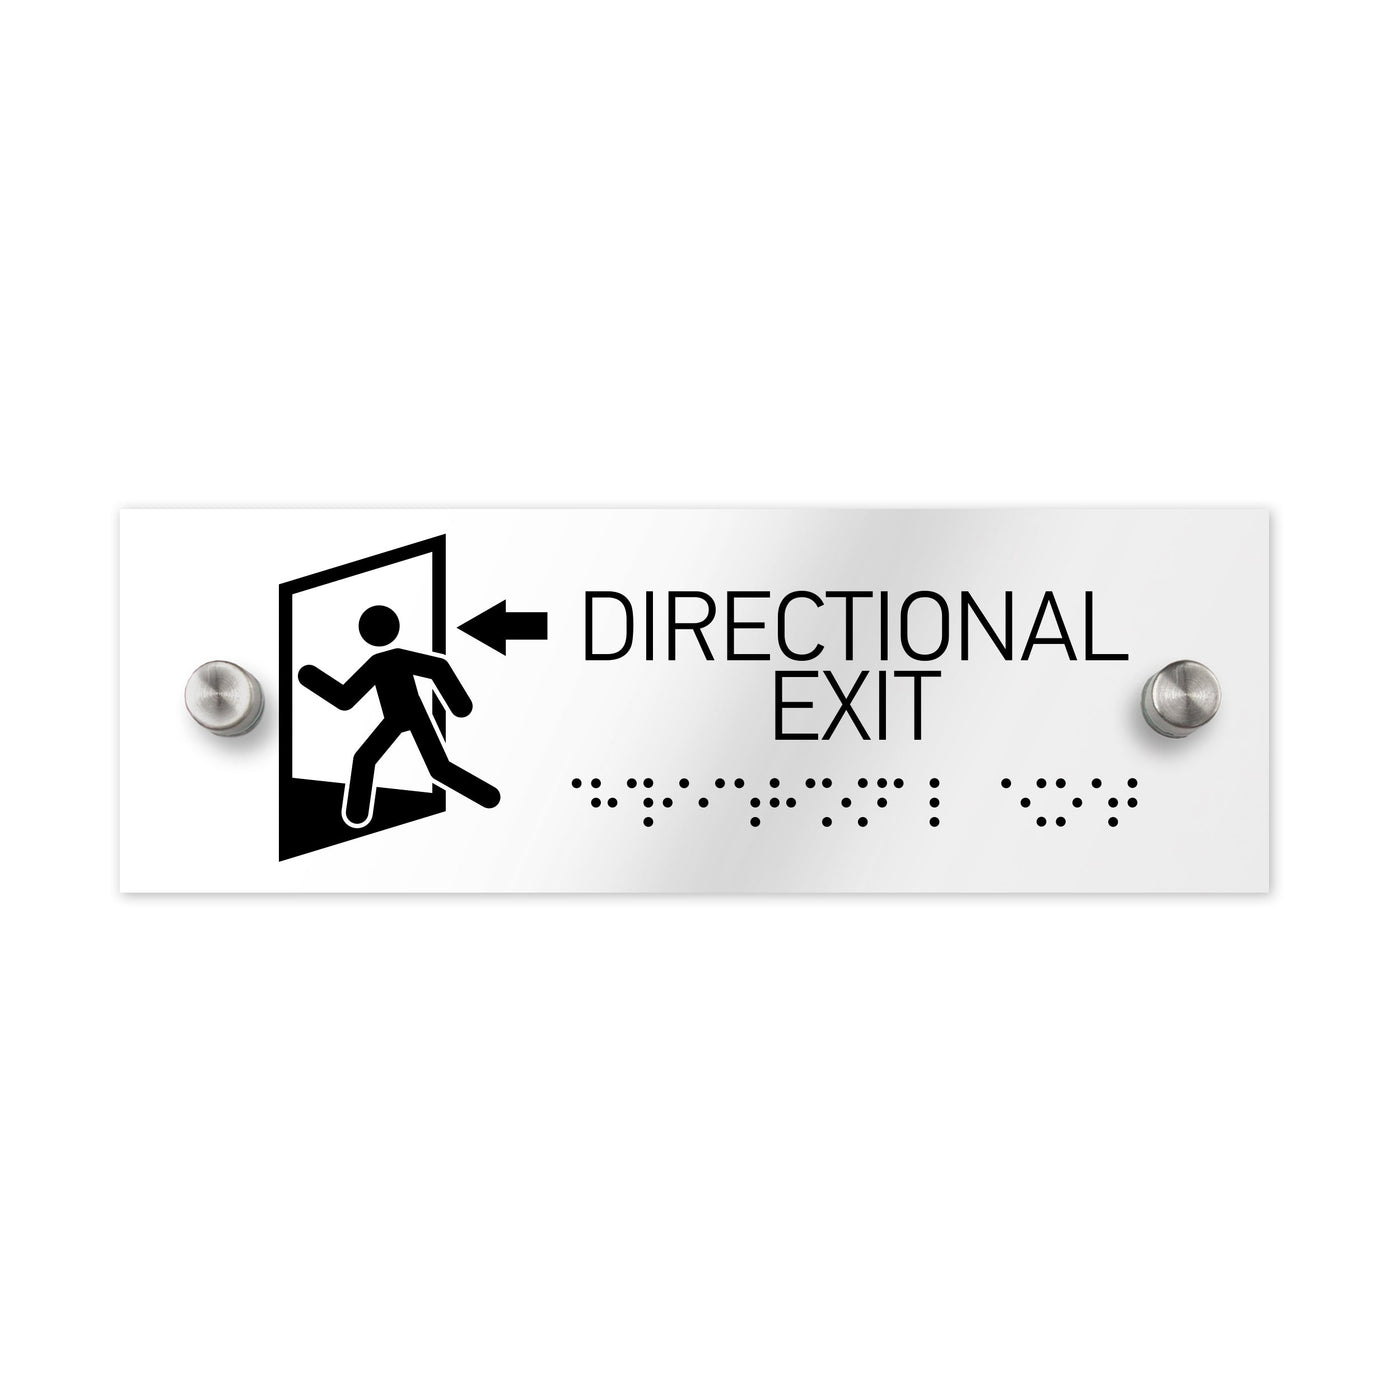 Information Signs - Directional Exit Clear Acrylik Braille Door Sign